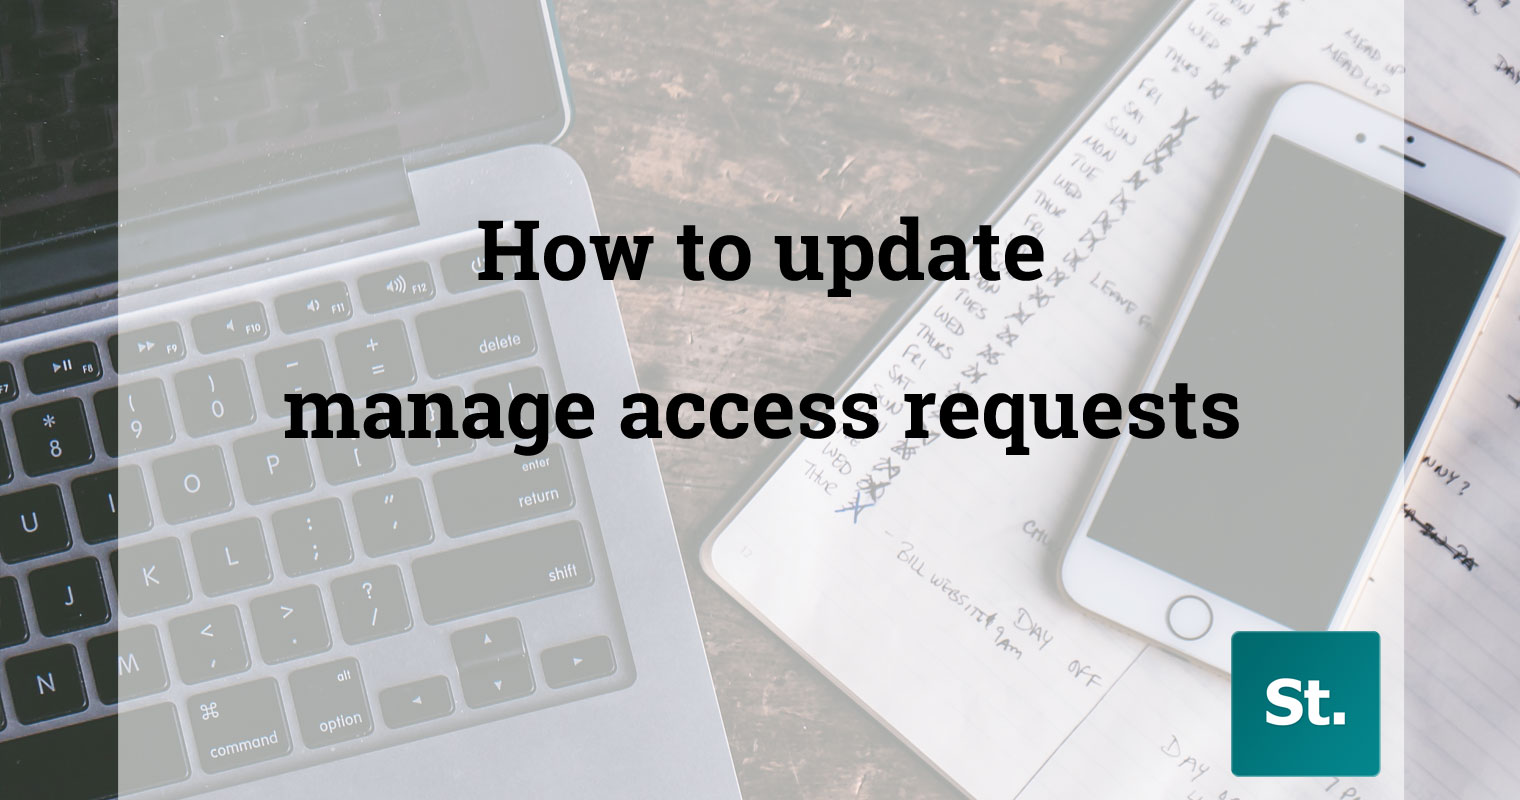 Updating manage access requests